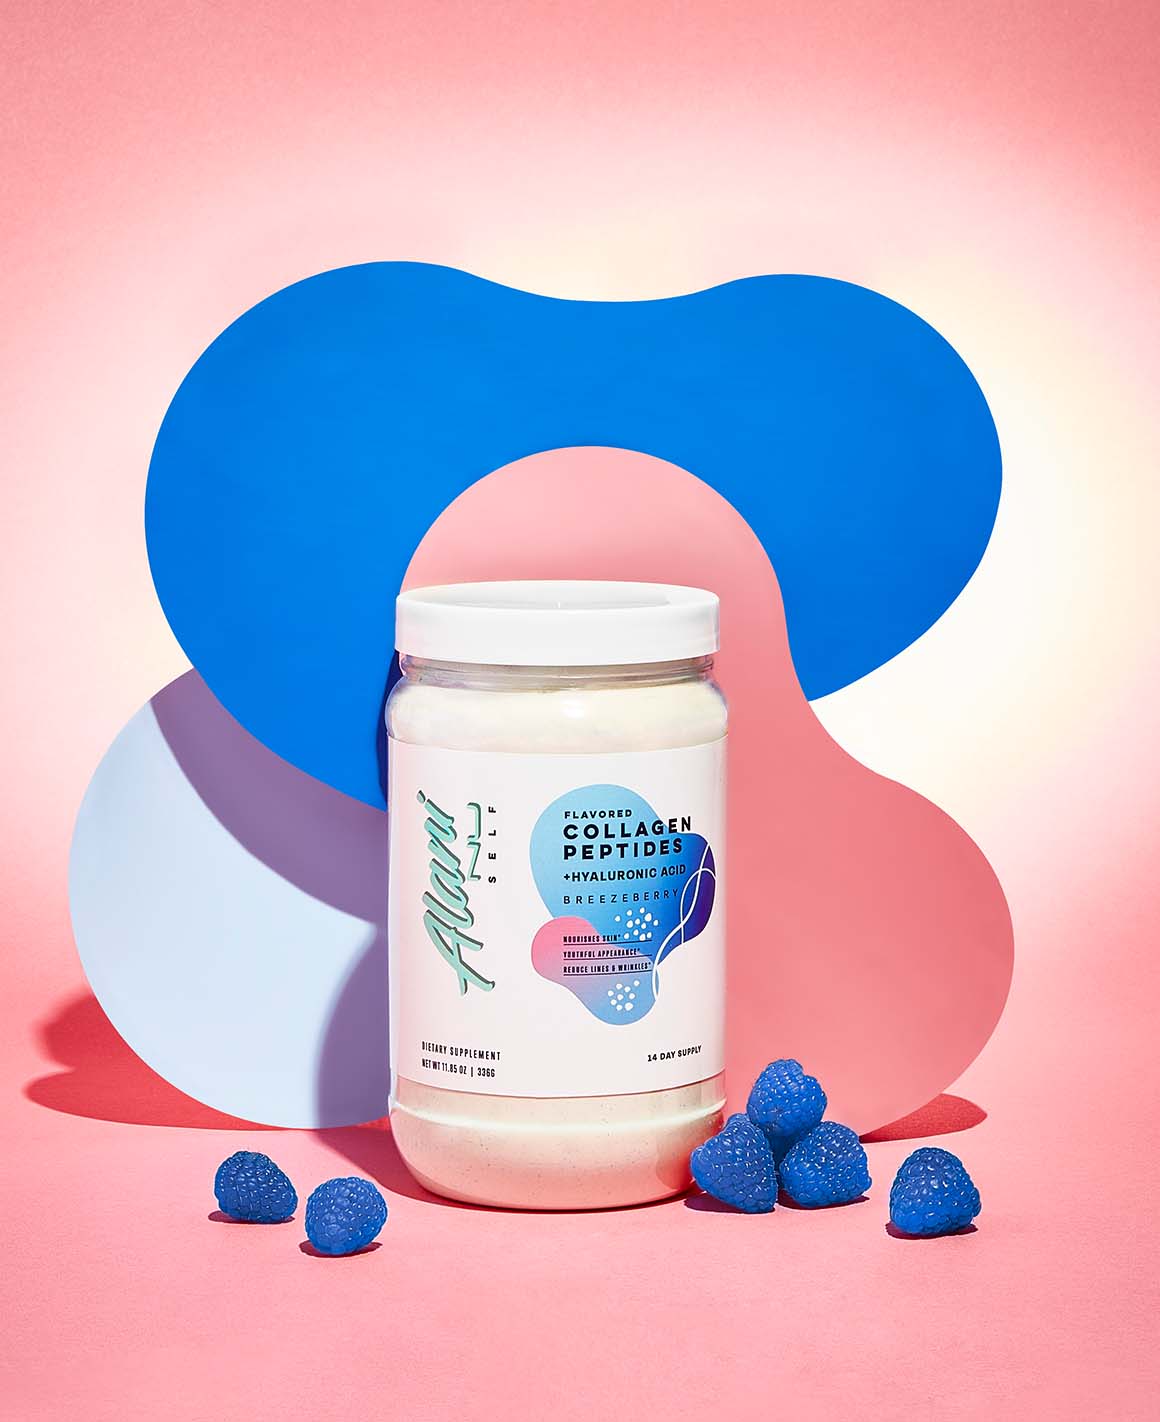 A 14-day supply container of Collagen Peptides in Breezeberry flavor sitting next to a pile of blueberries.